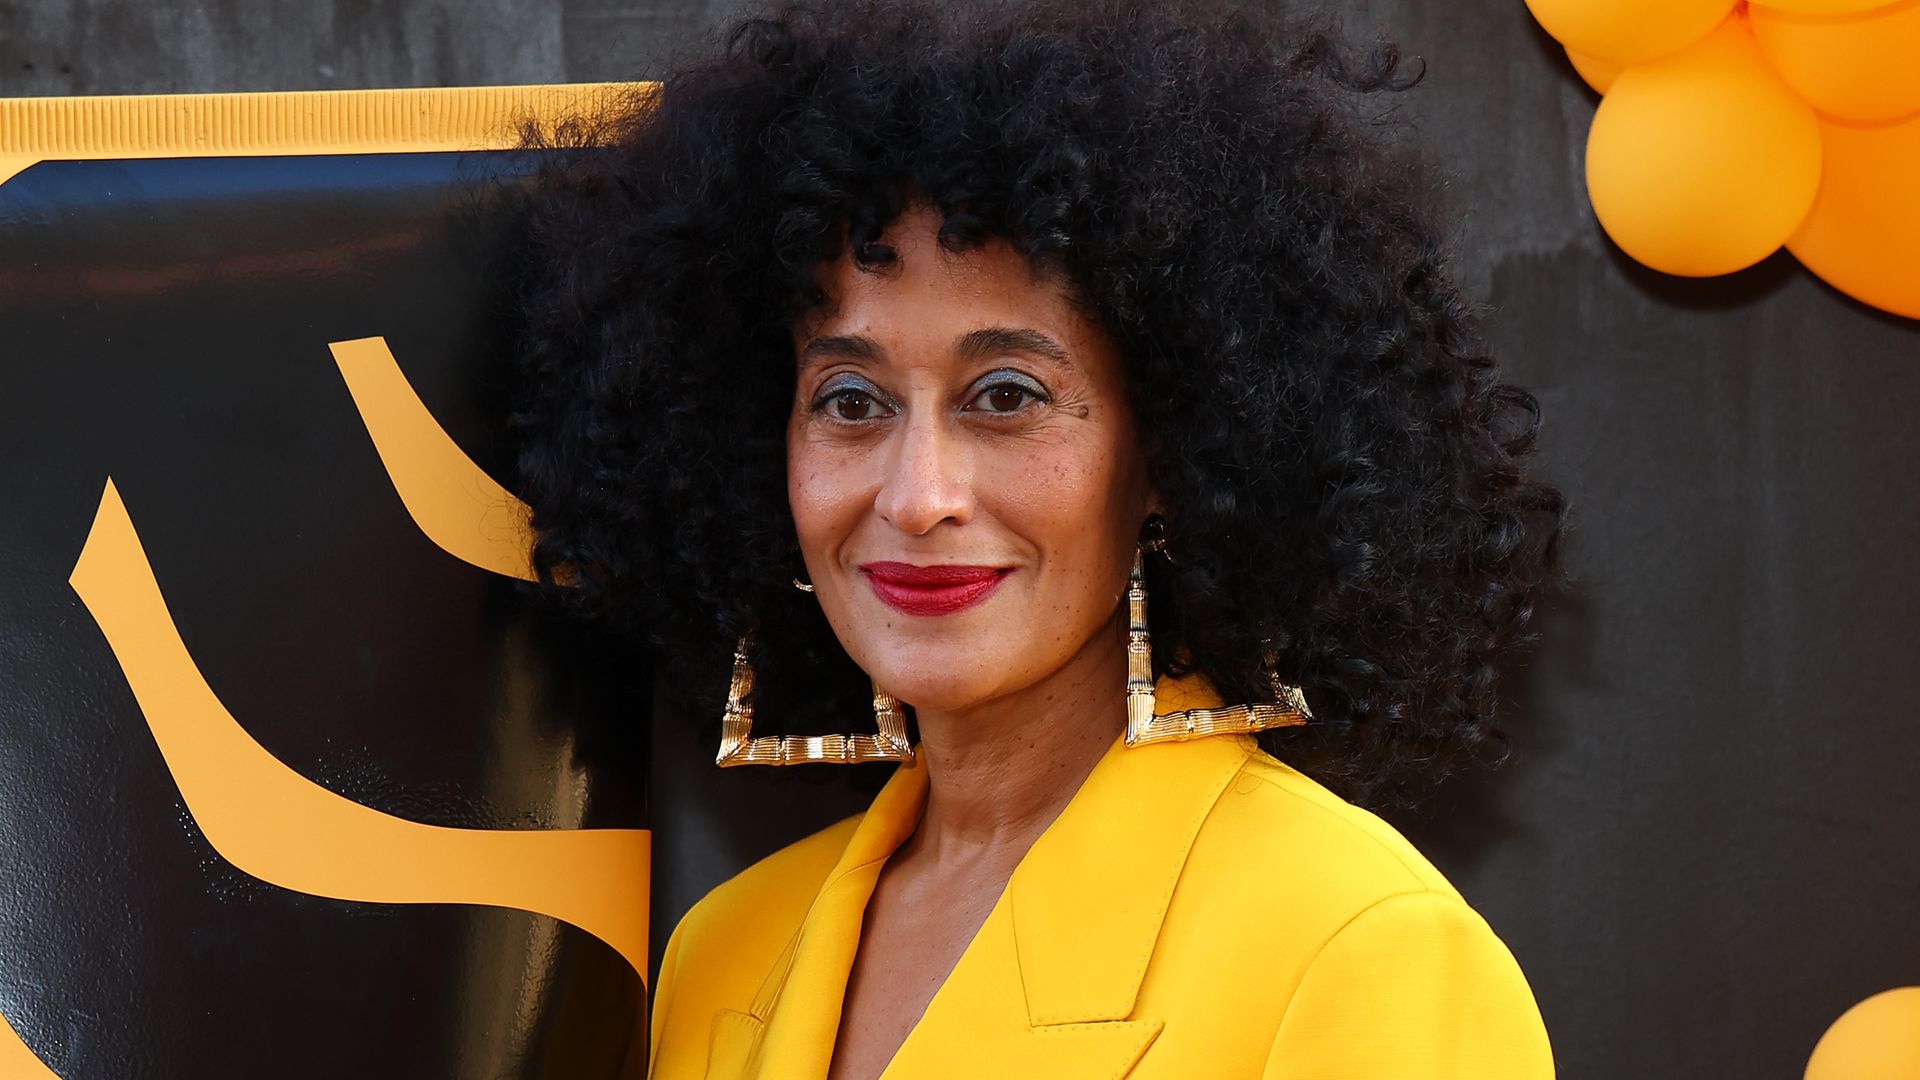 Tracee Ellis Ross attends the PATTERN Beauty Meet & Greet at Sephora at the Grove on September 17, 2022 in Los Angeles, California.